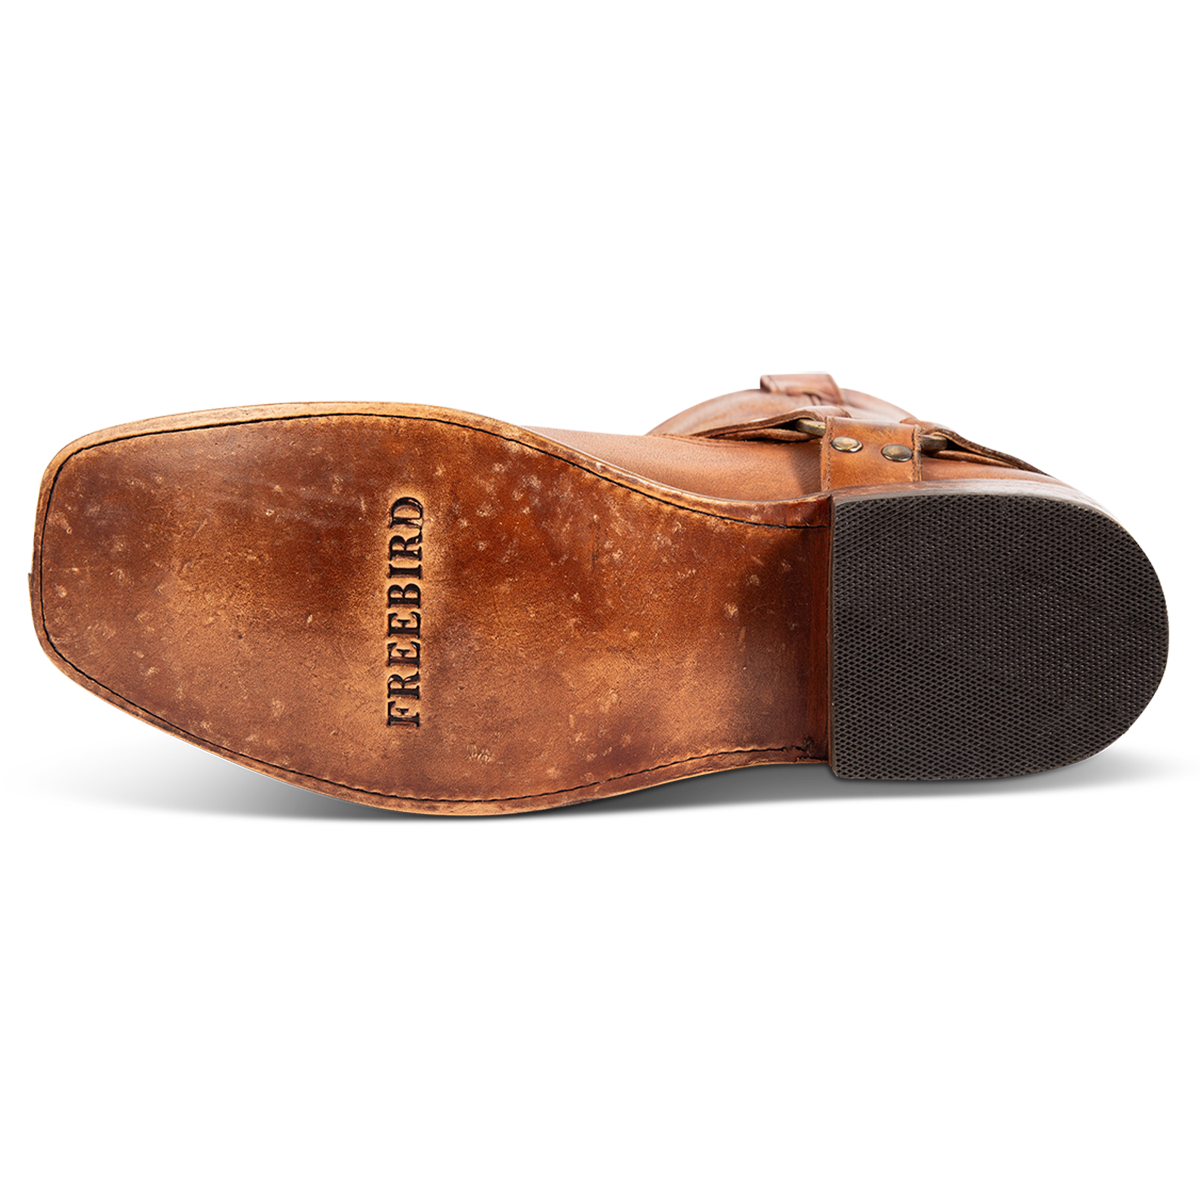 Leather sole imprinted with FREEBIRD on men's Copperhead whiskey boot